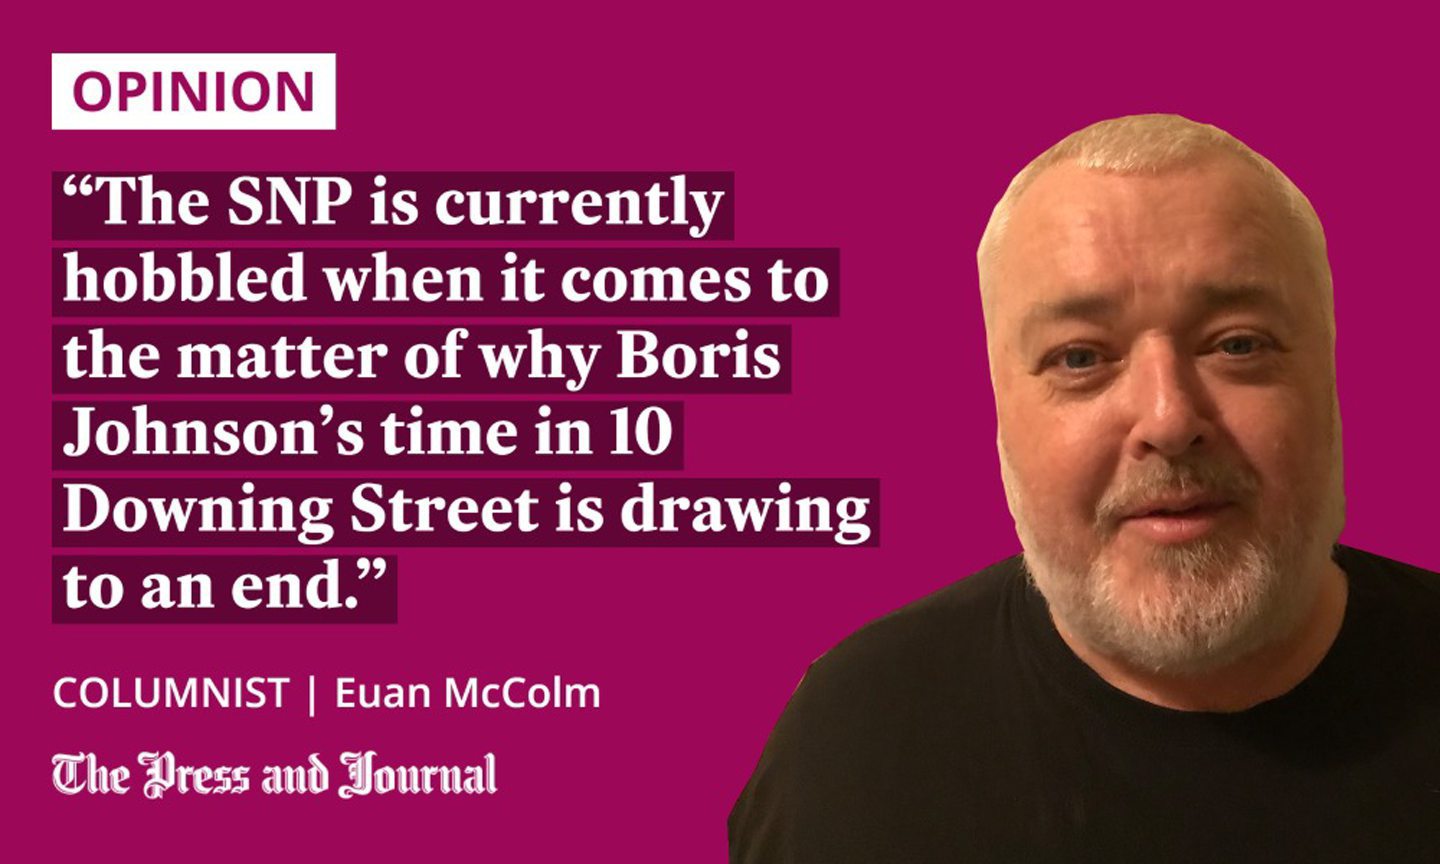 Columnist, Euan Malcolm speaks about Boris and SNP: "The SNP is currently hobbled when it comes to the matter of why Boris Johnson’s time in 10 Downing Street is drawing to an end."